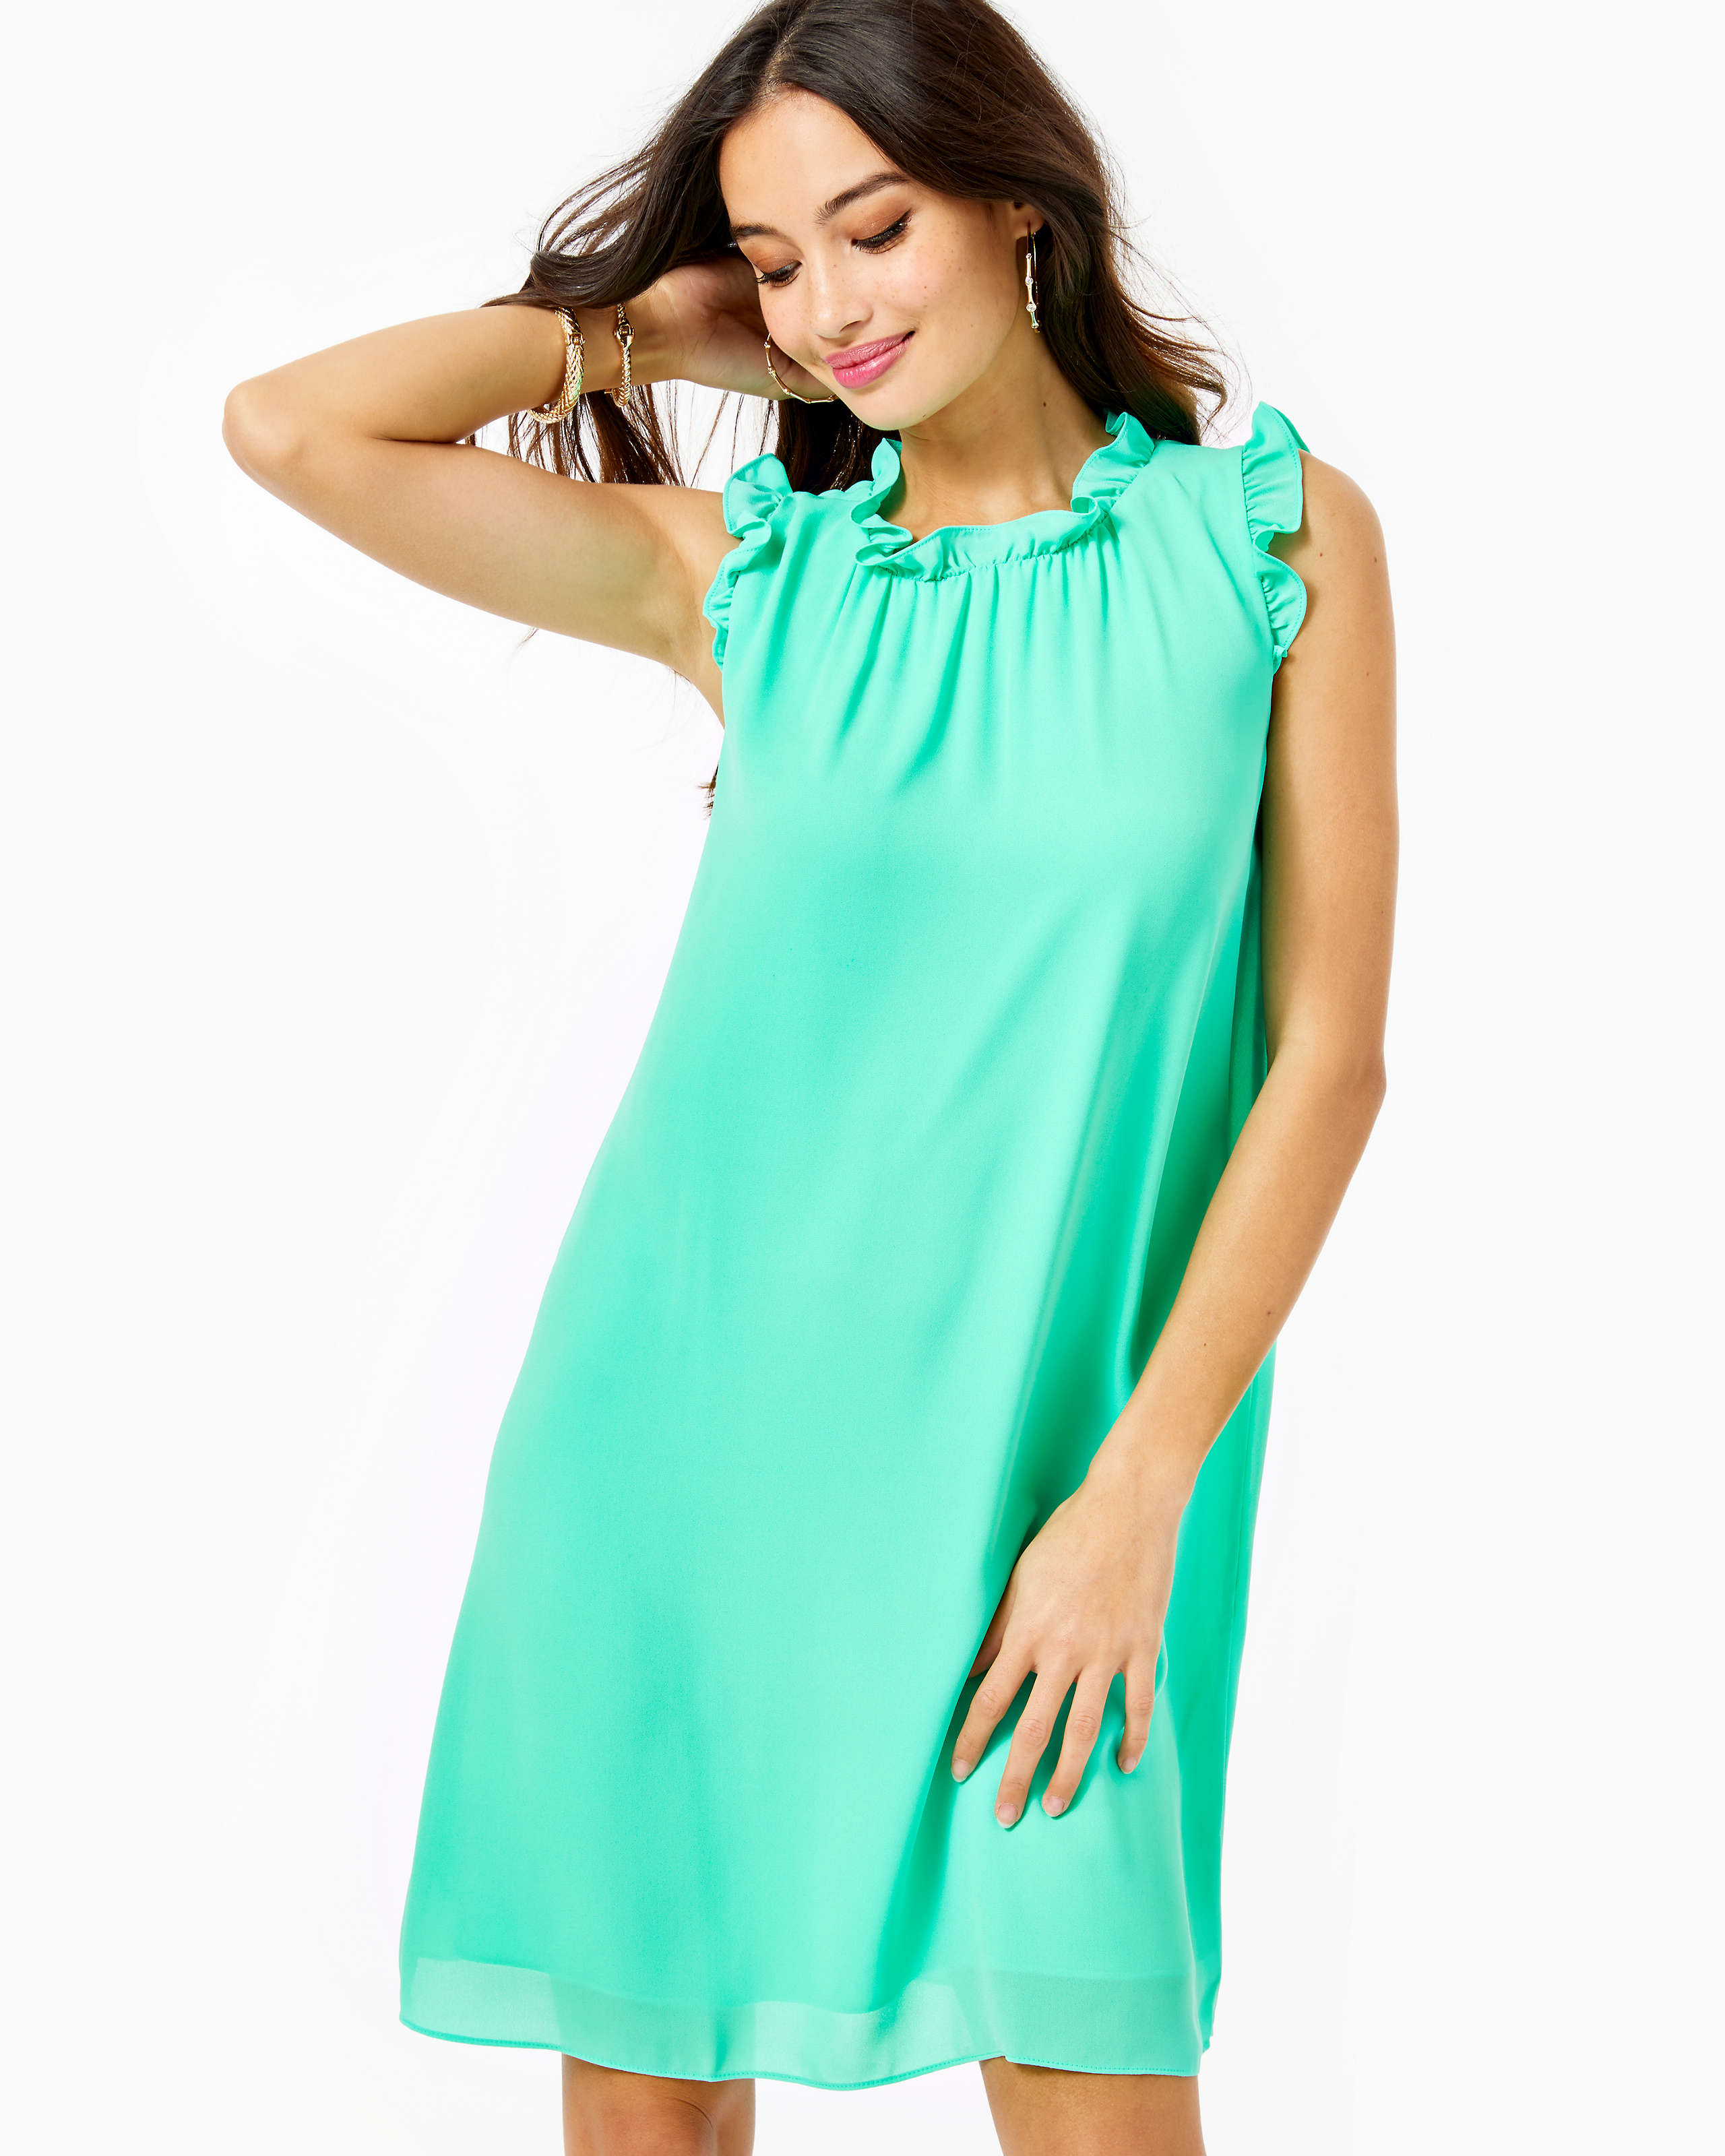 Talisa Dress, Gustavia Green, large - Lilly Pulitzer Zoomed